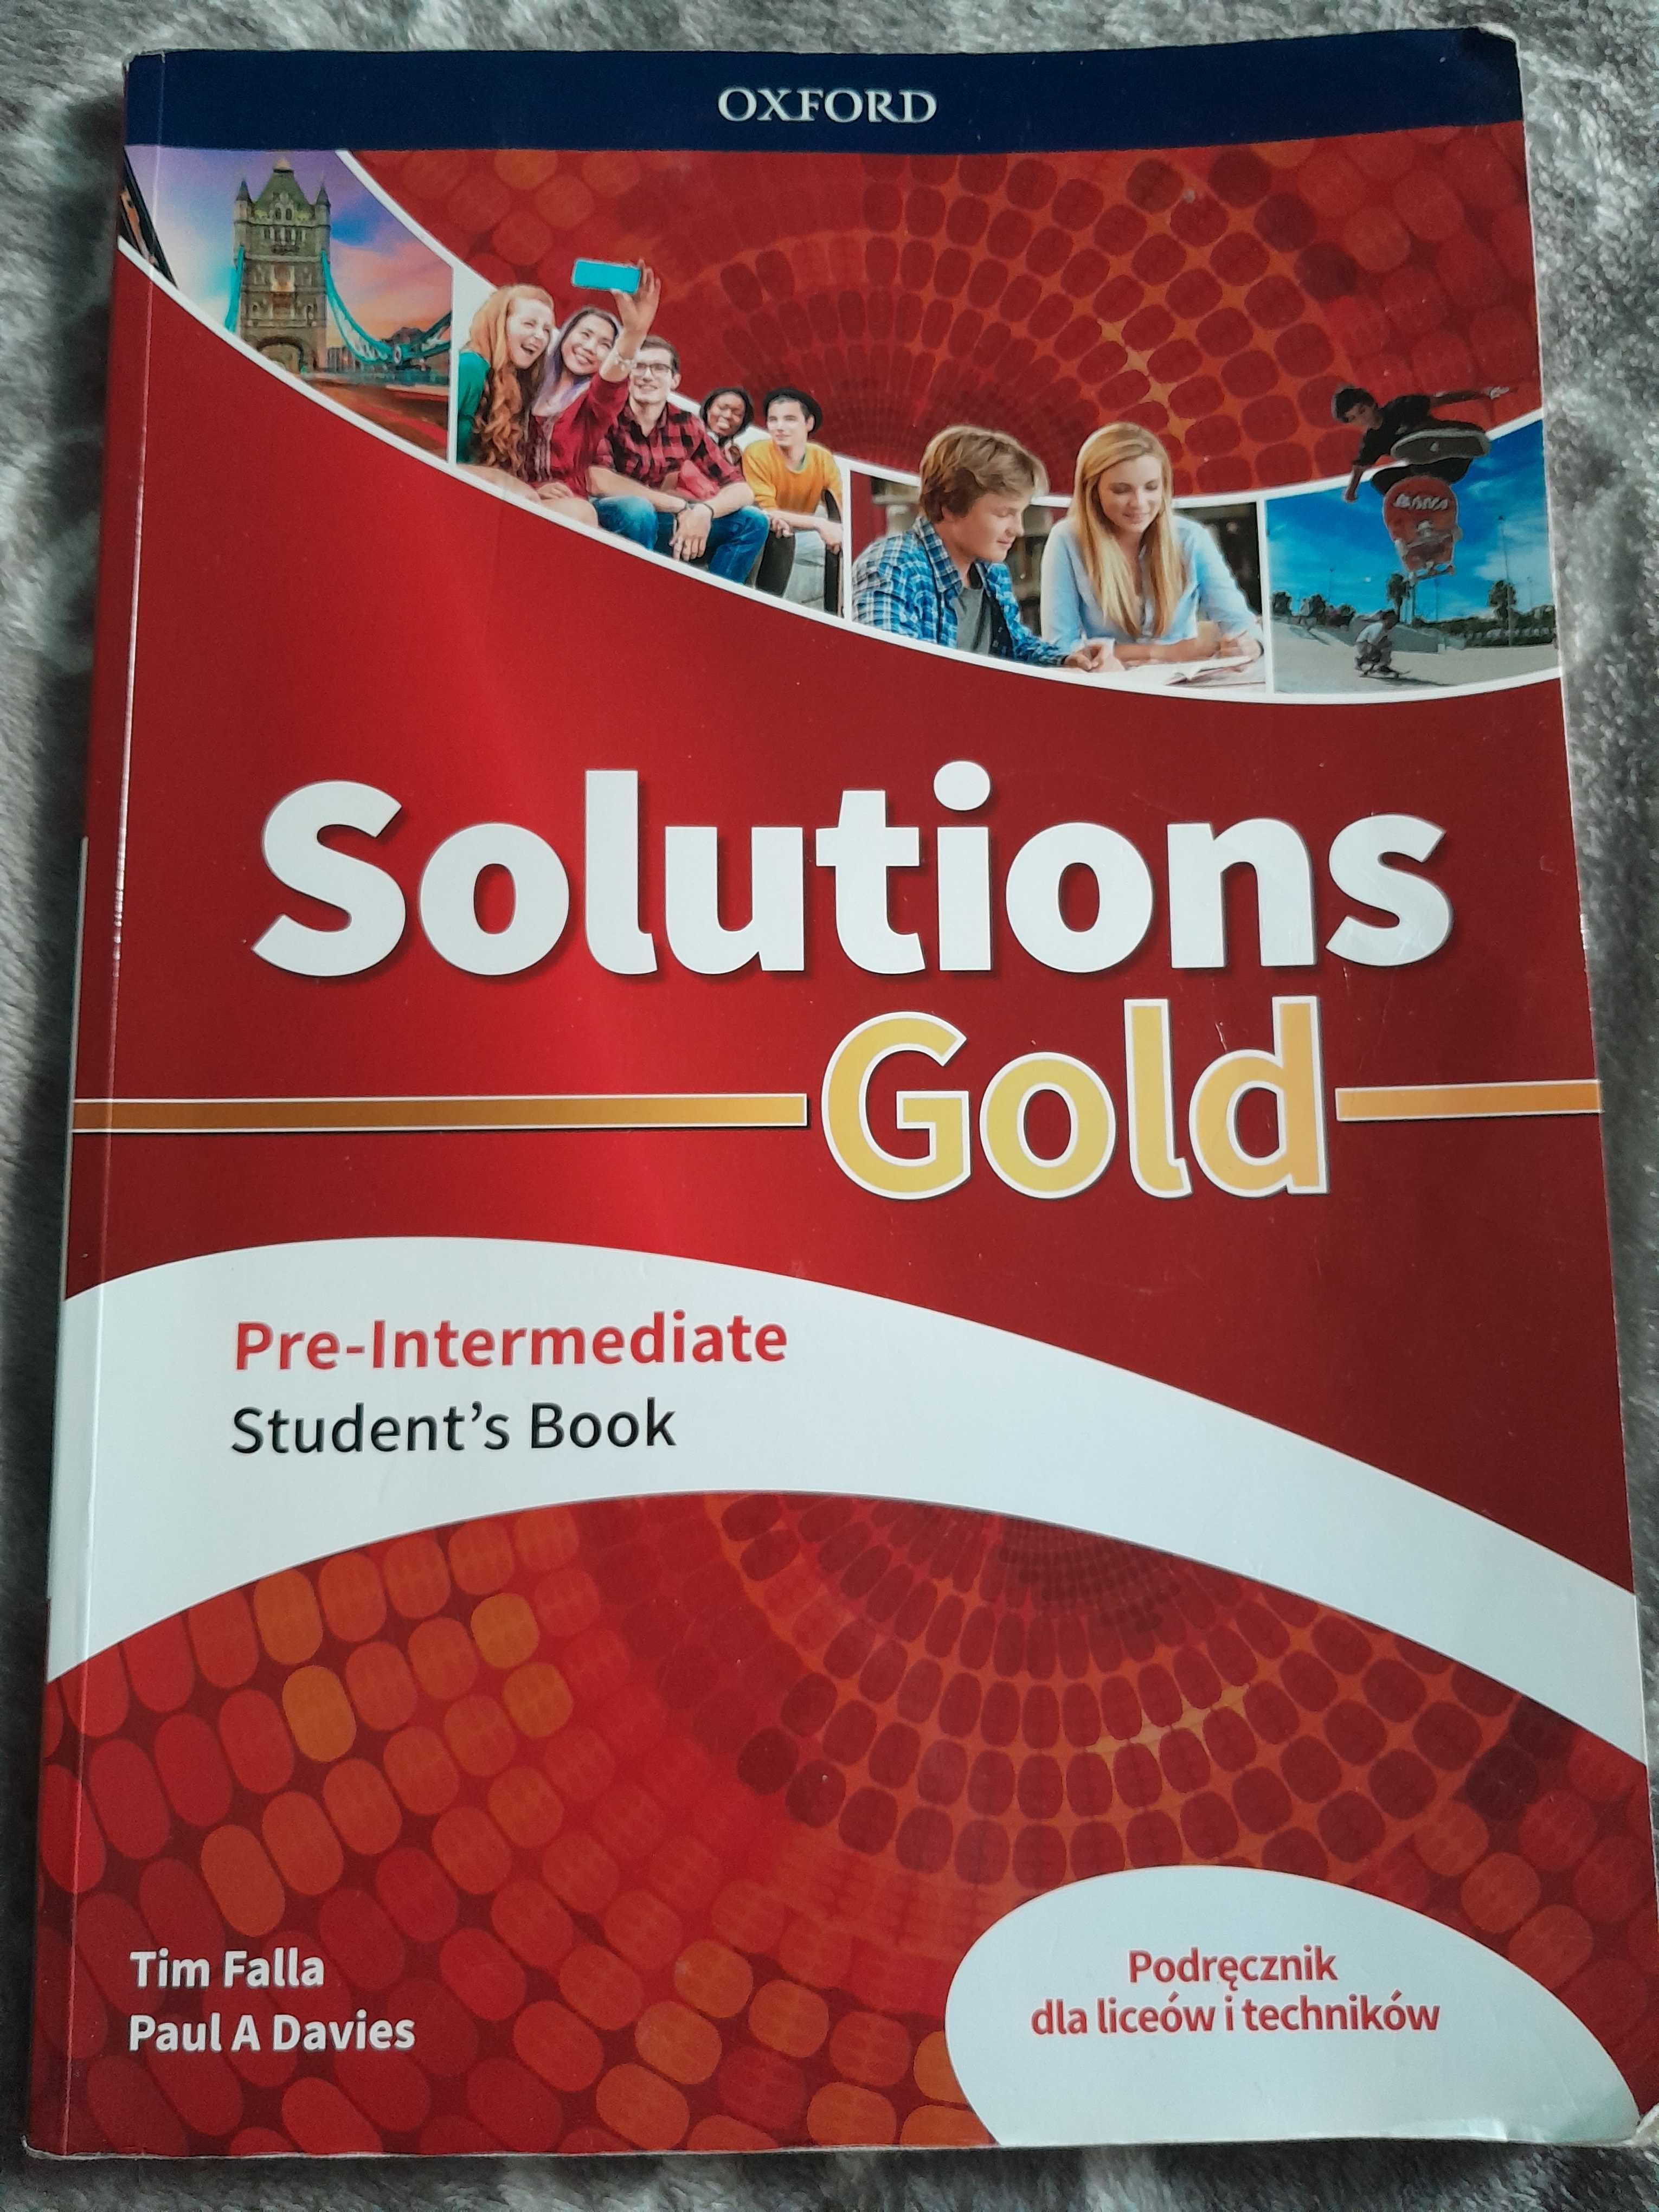 Solution Gold student's book